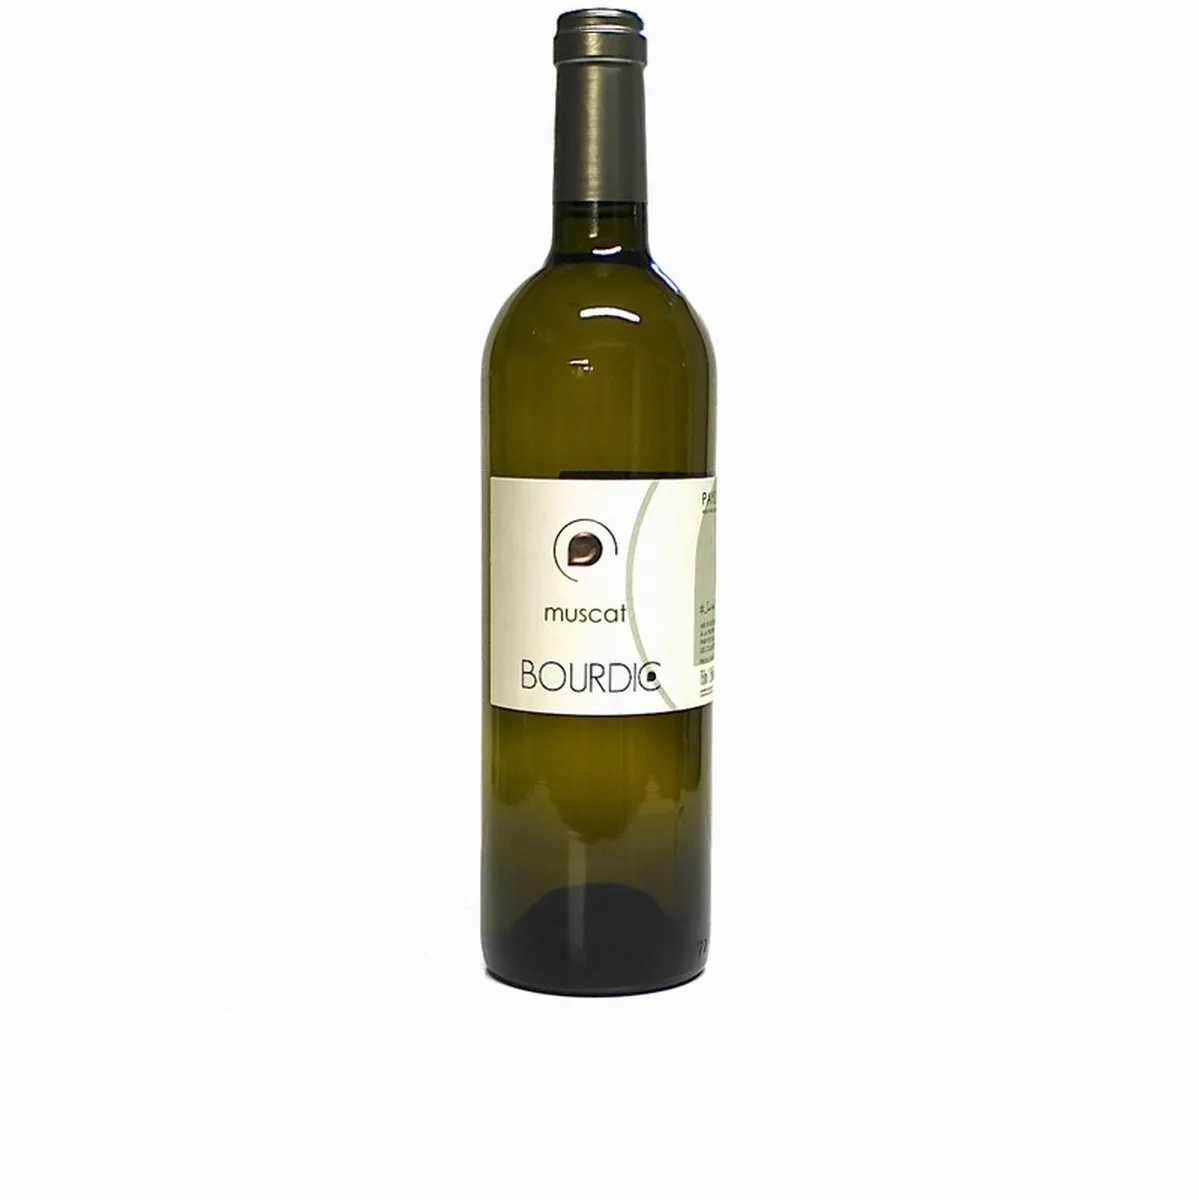 WINE OF OC COUNTRIES - MUSCAT HILLS OF BOURDIC 2014 75 CL